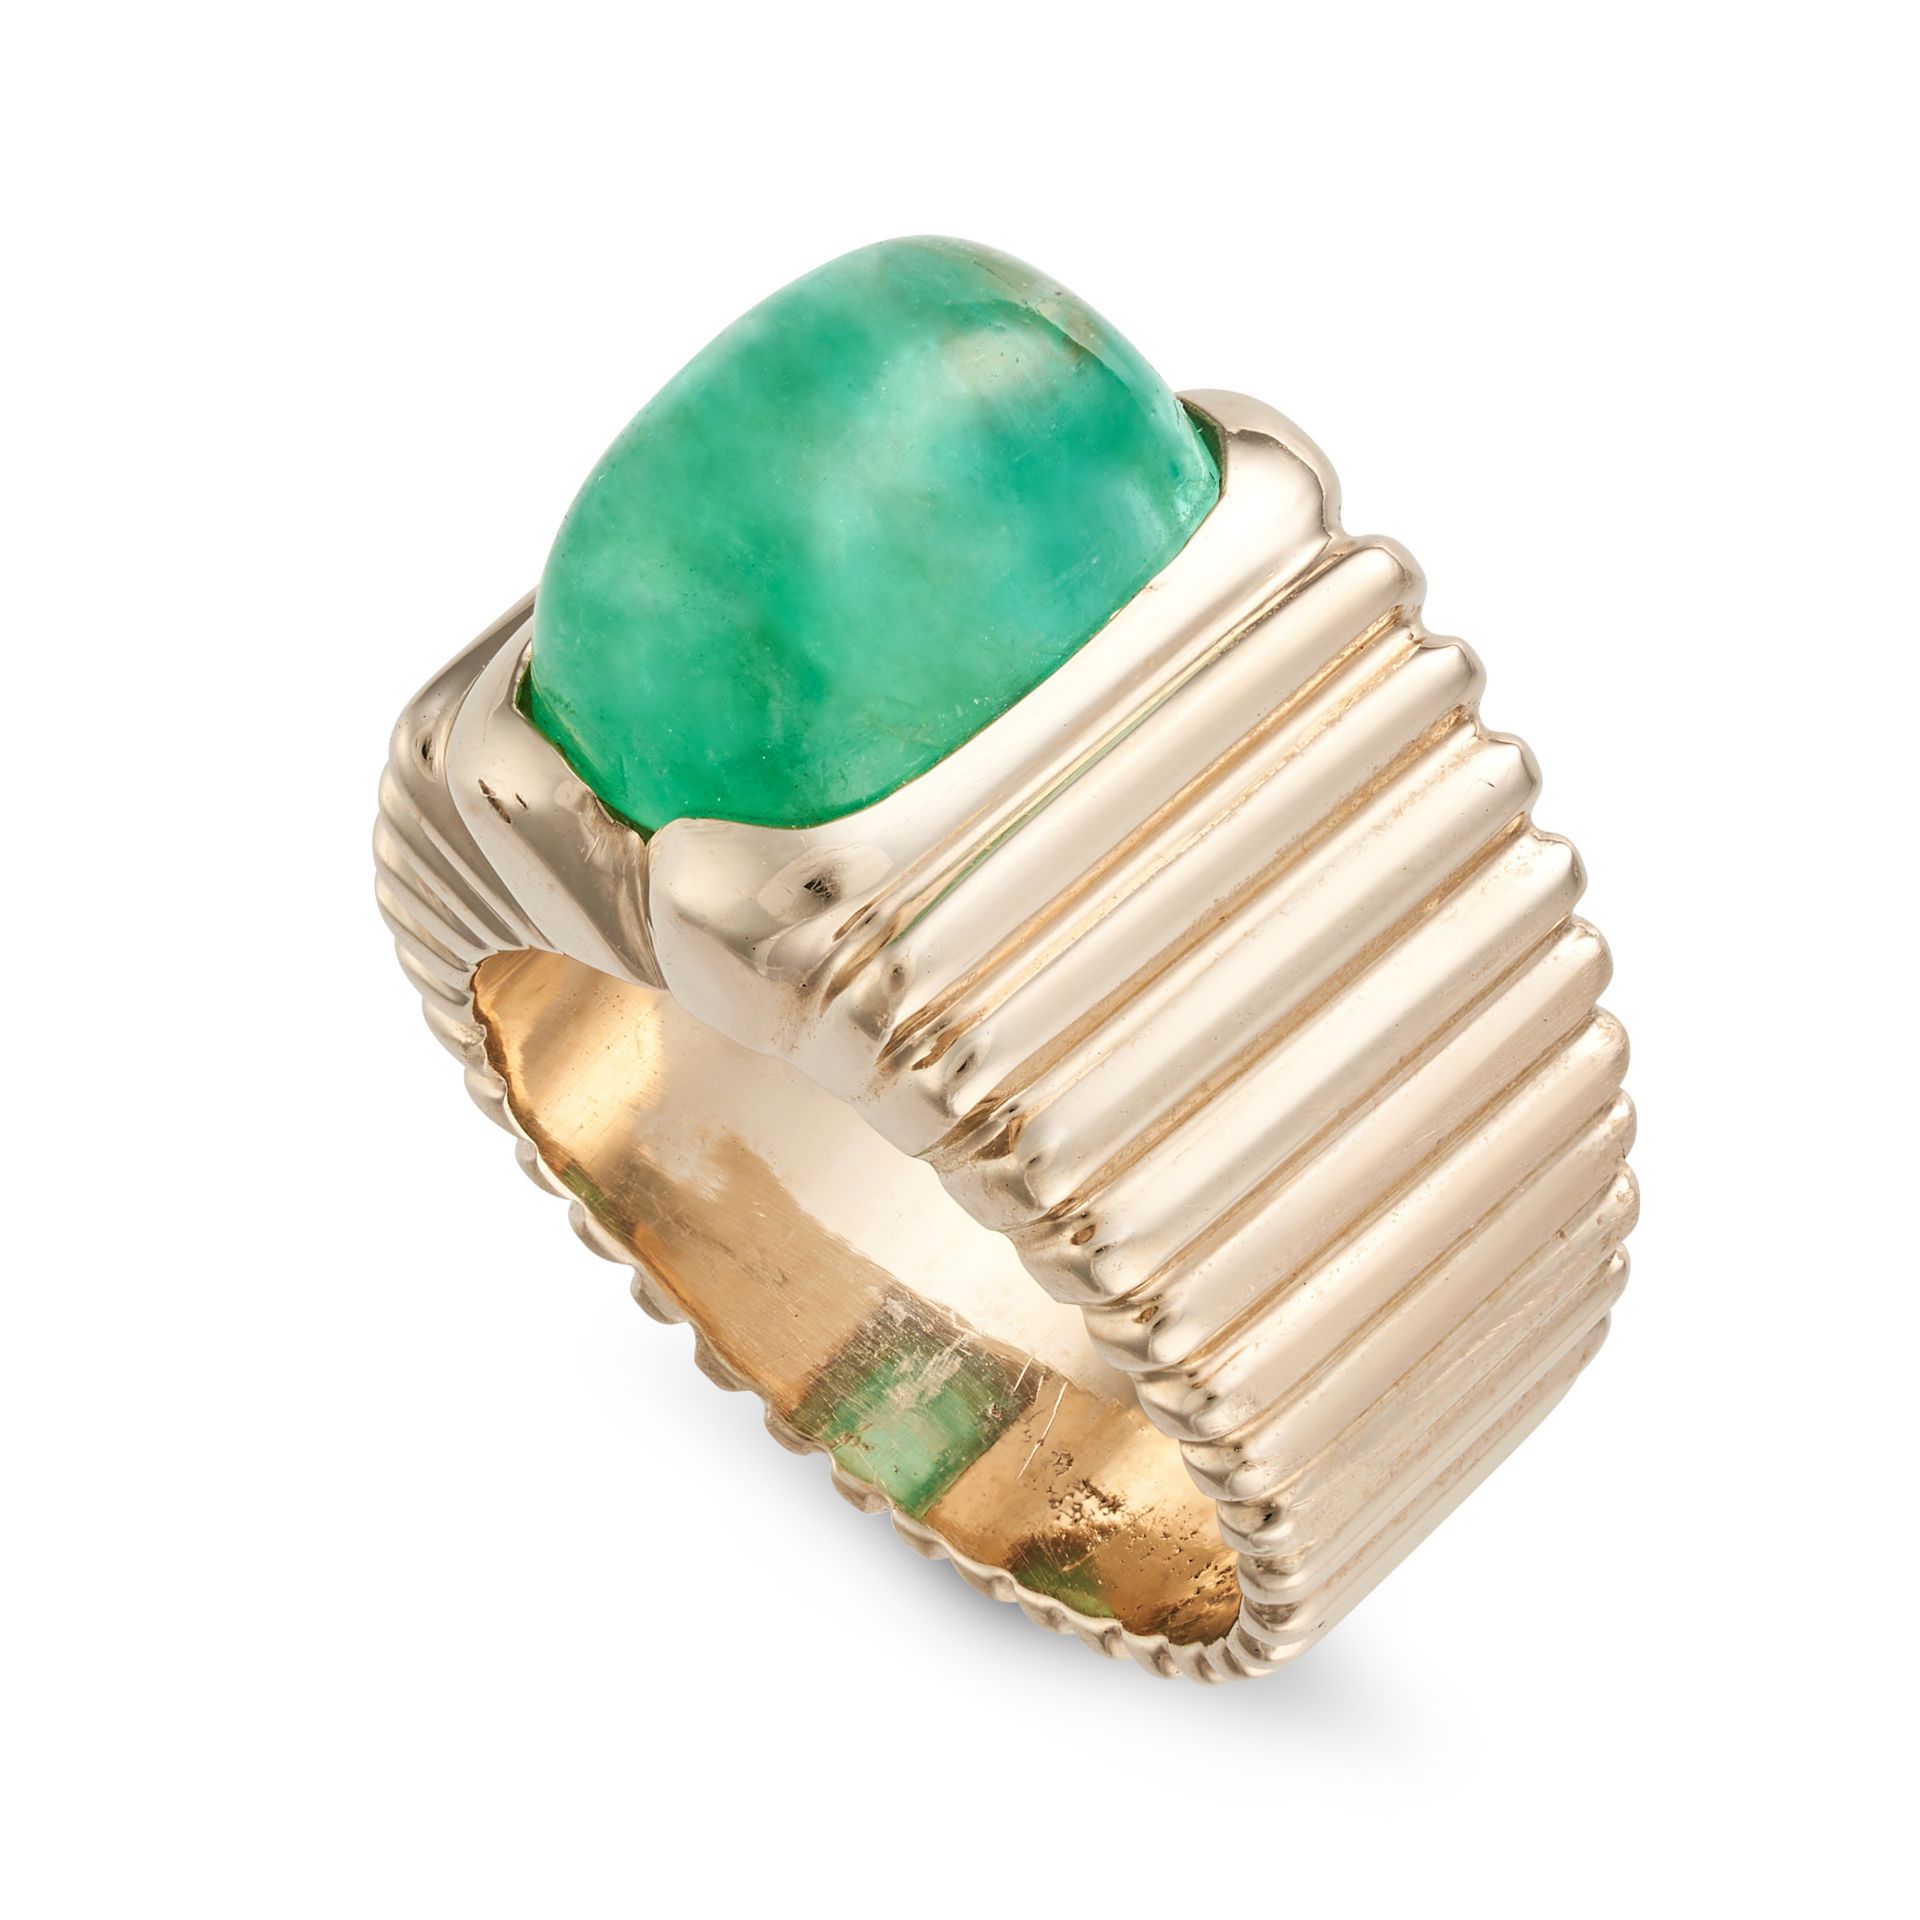 BOUCHERON, AN EMERALD RING in 18ct yellow gold, the fluted band set with a cabochon emerald, sign... - Image 2 of 2